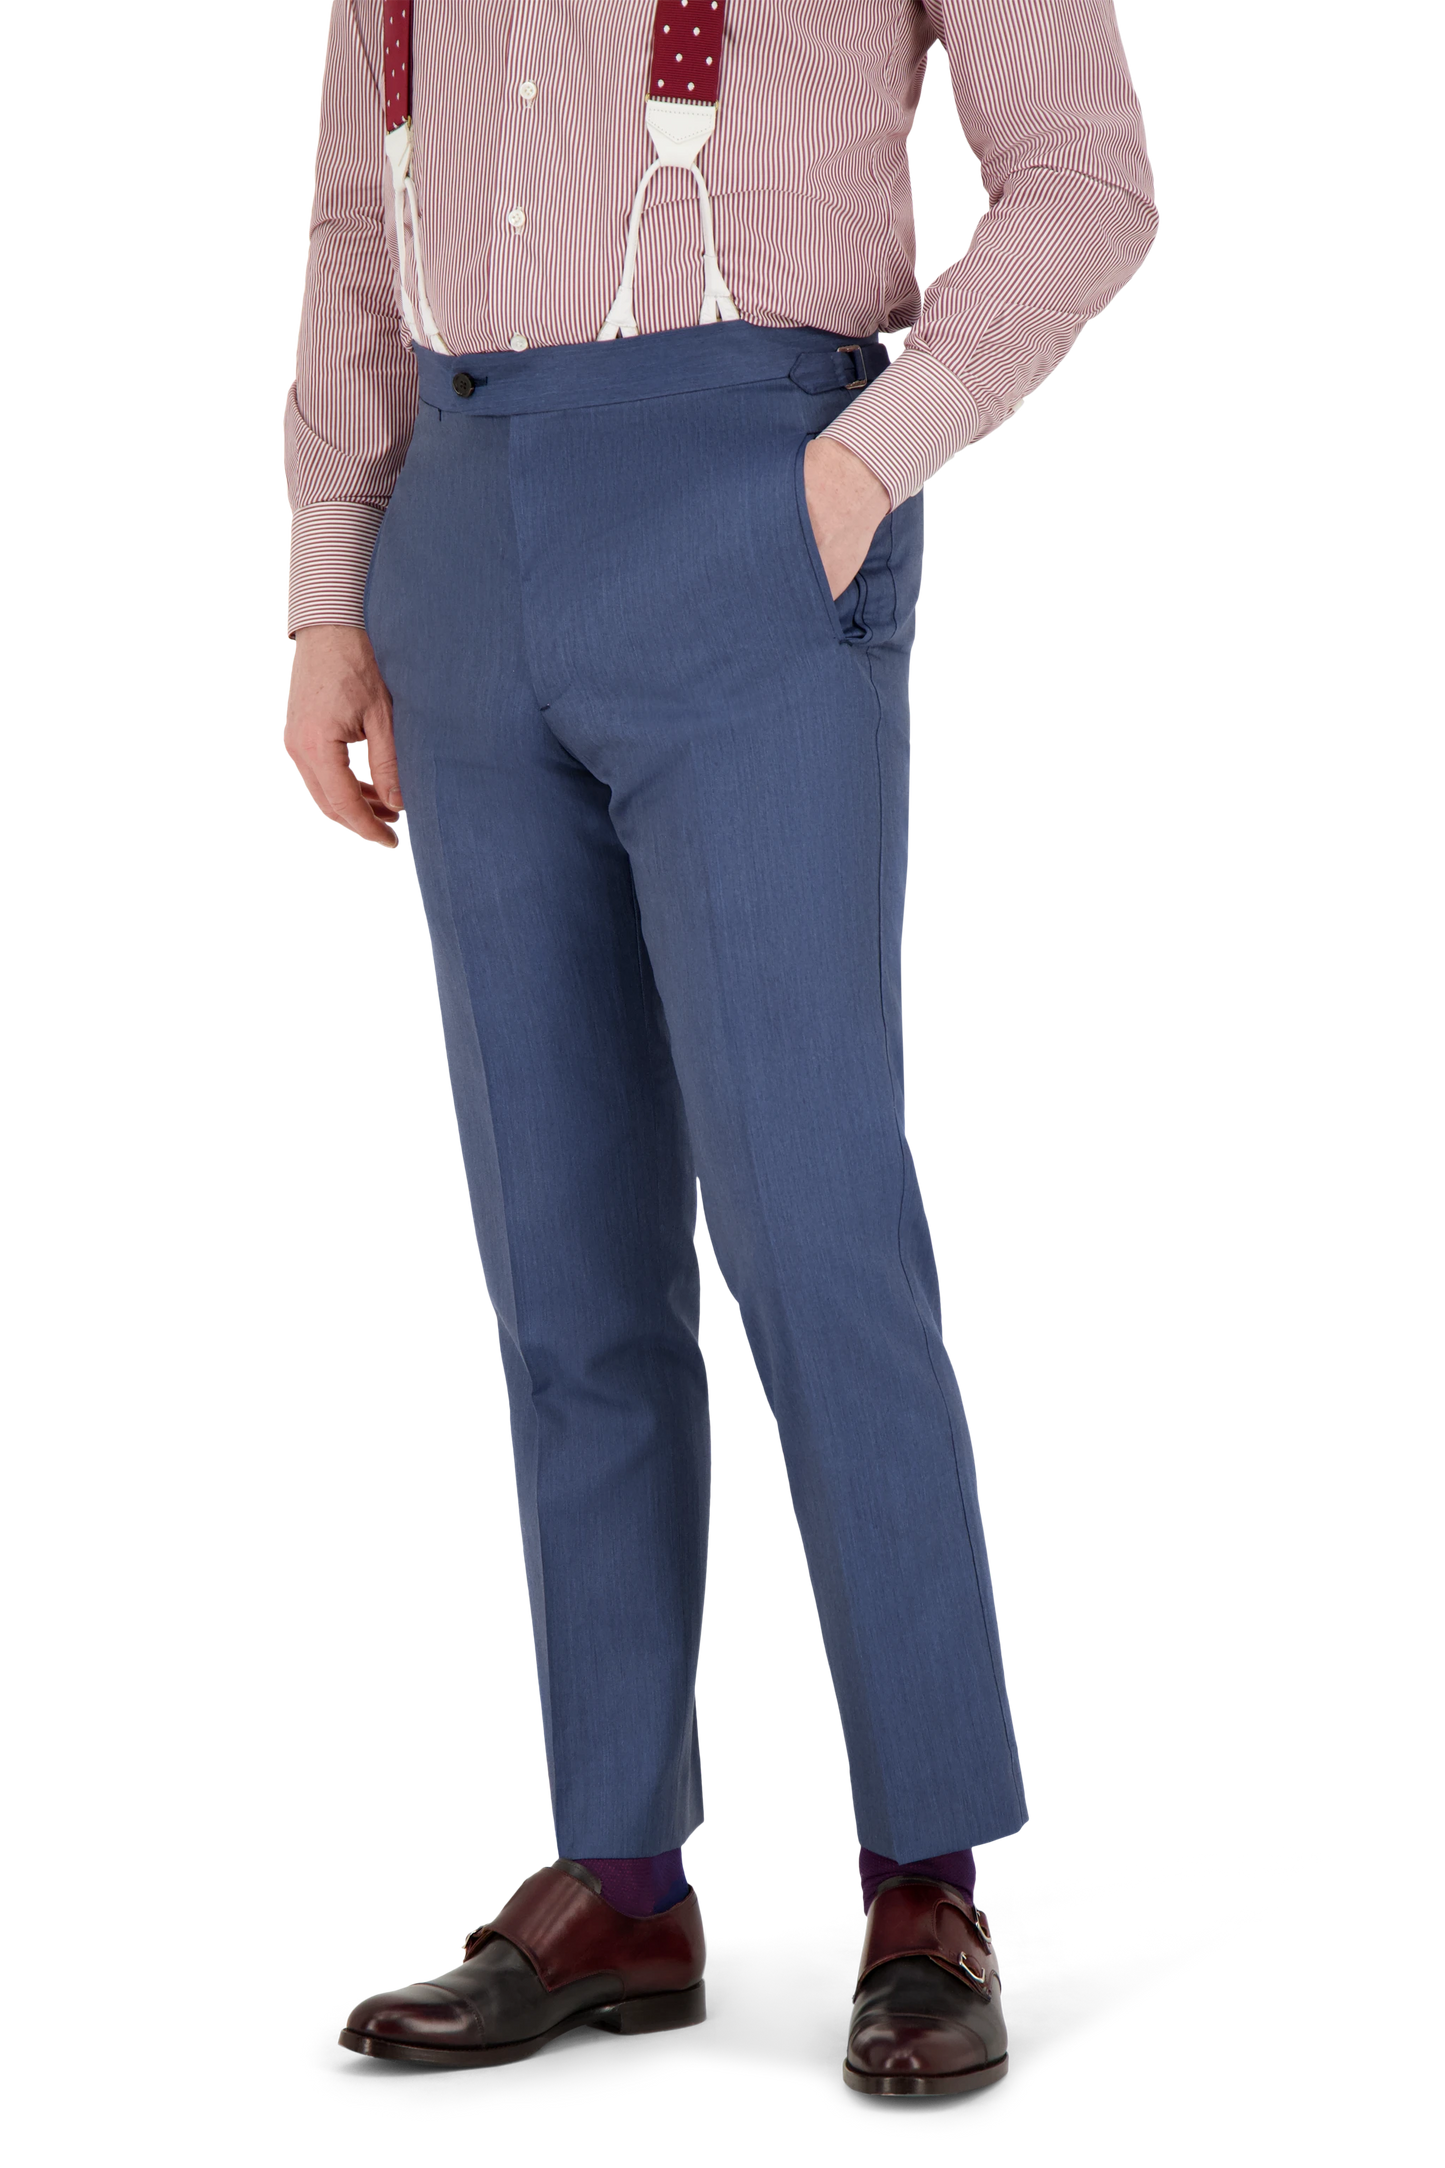 Trousers Zurich blue and light grey Wool and Cashmere herringbone